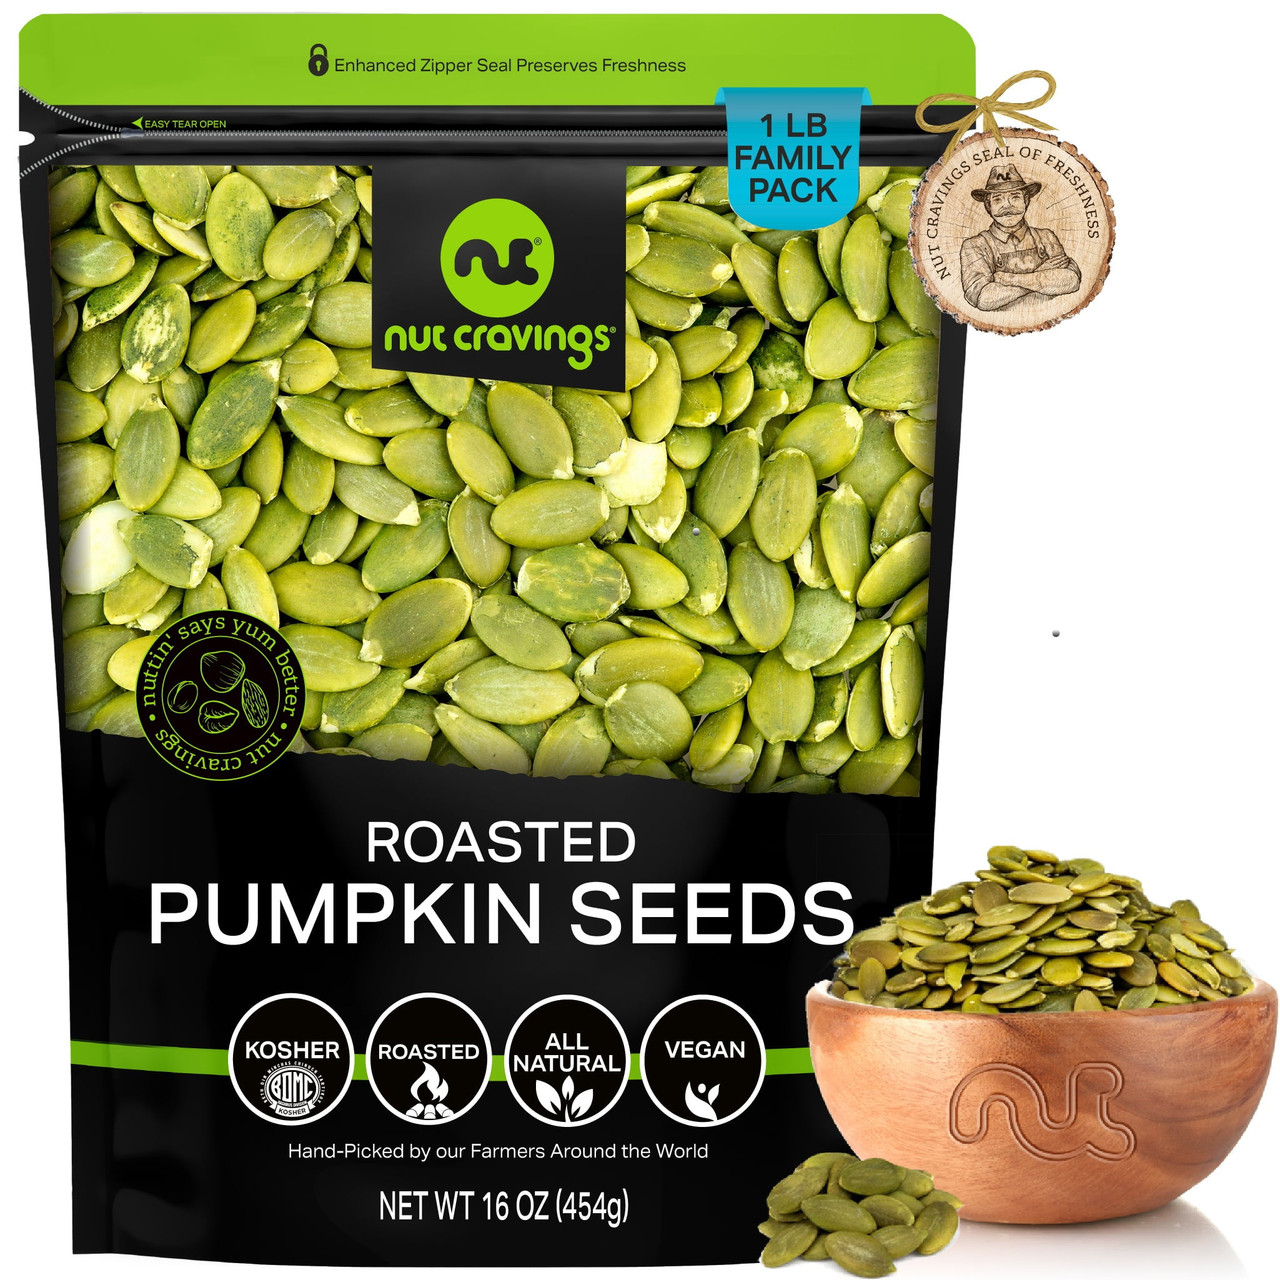 Roasted & Unsalted Pumpkin Seeds, Pepitas, No Shell (1 lbs) by Nut Cravings - [From 52.33 - Choose pk Qty ] - *Ships from Miami